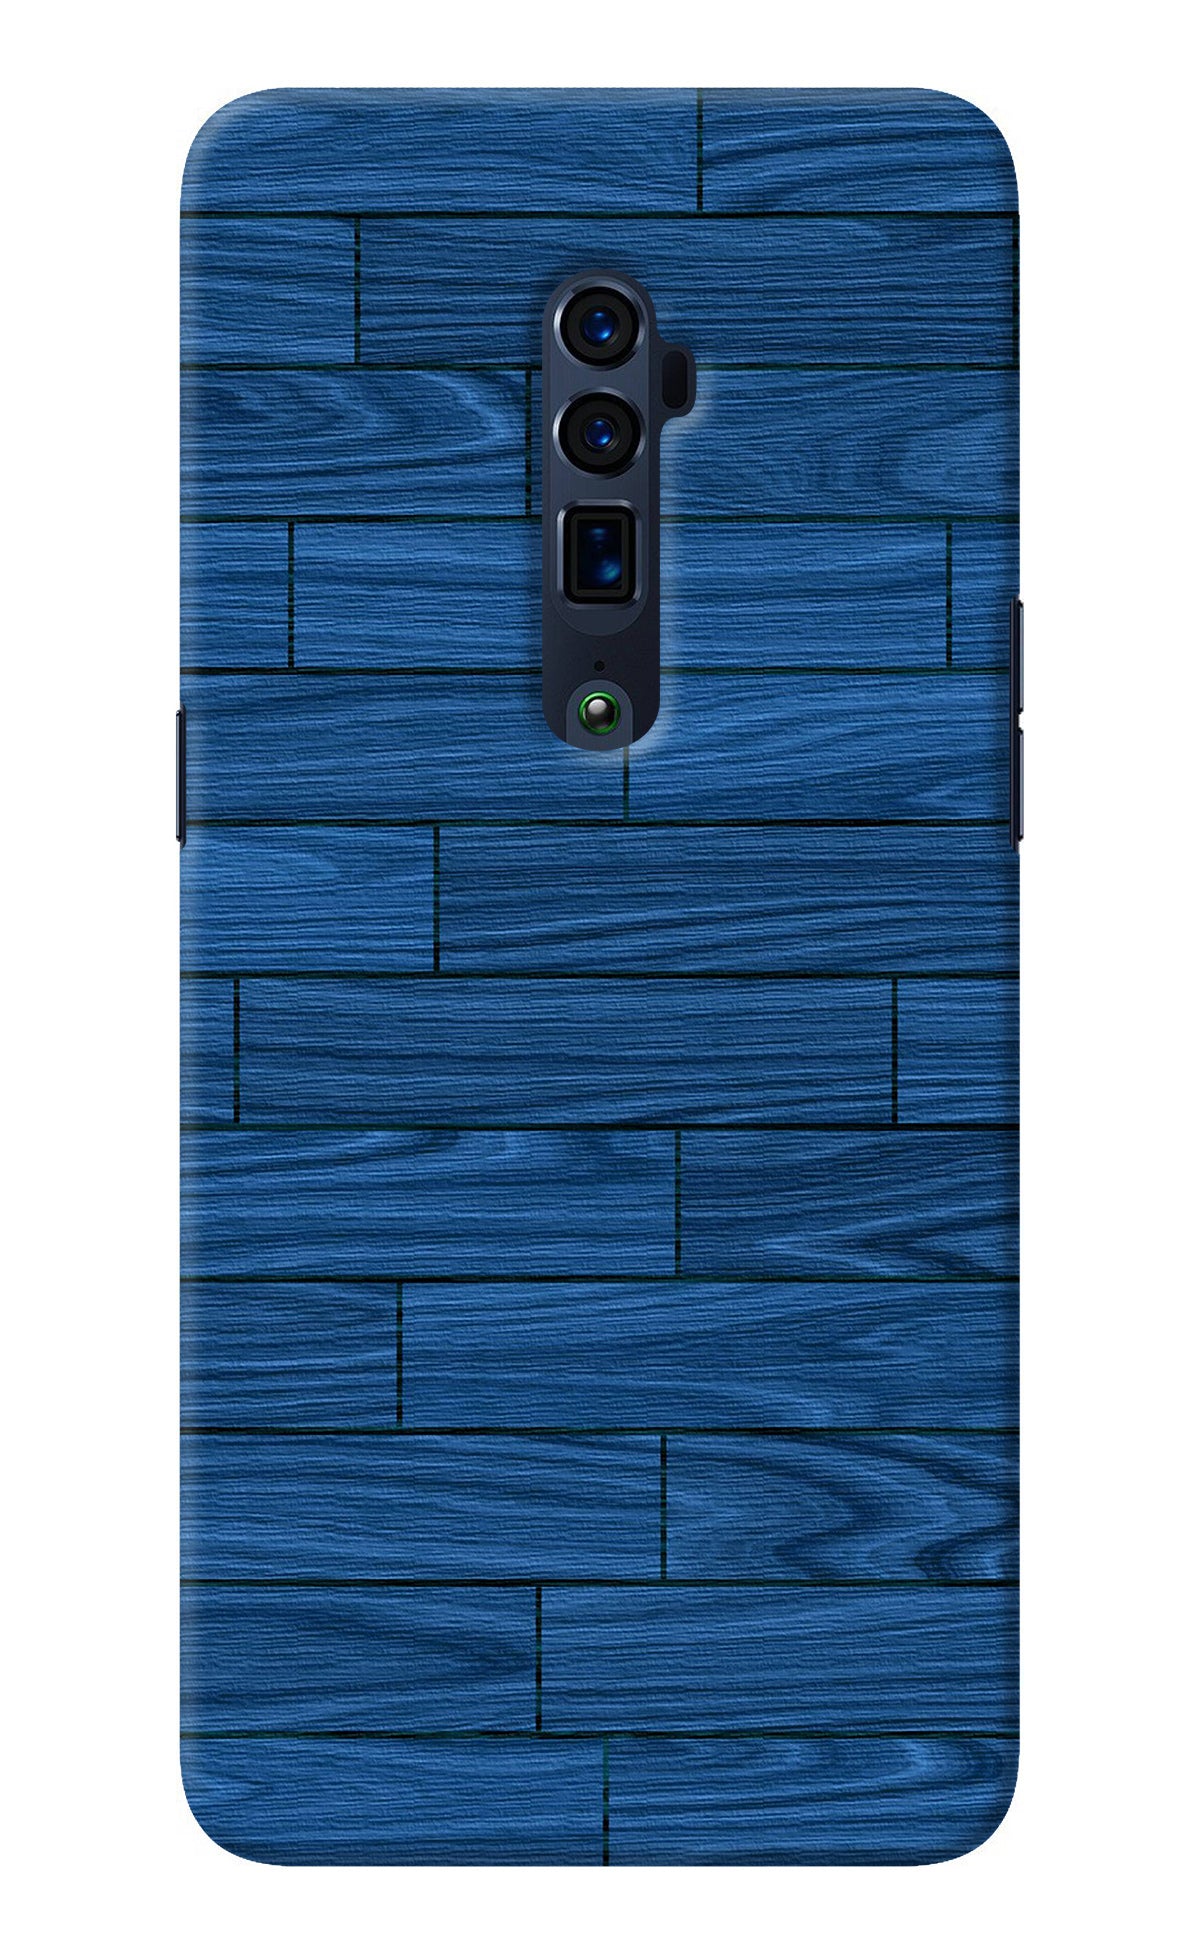 Wooden Texture Oppo Reno 10x Zoom Back Cover